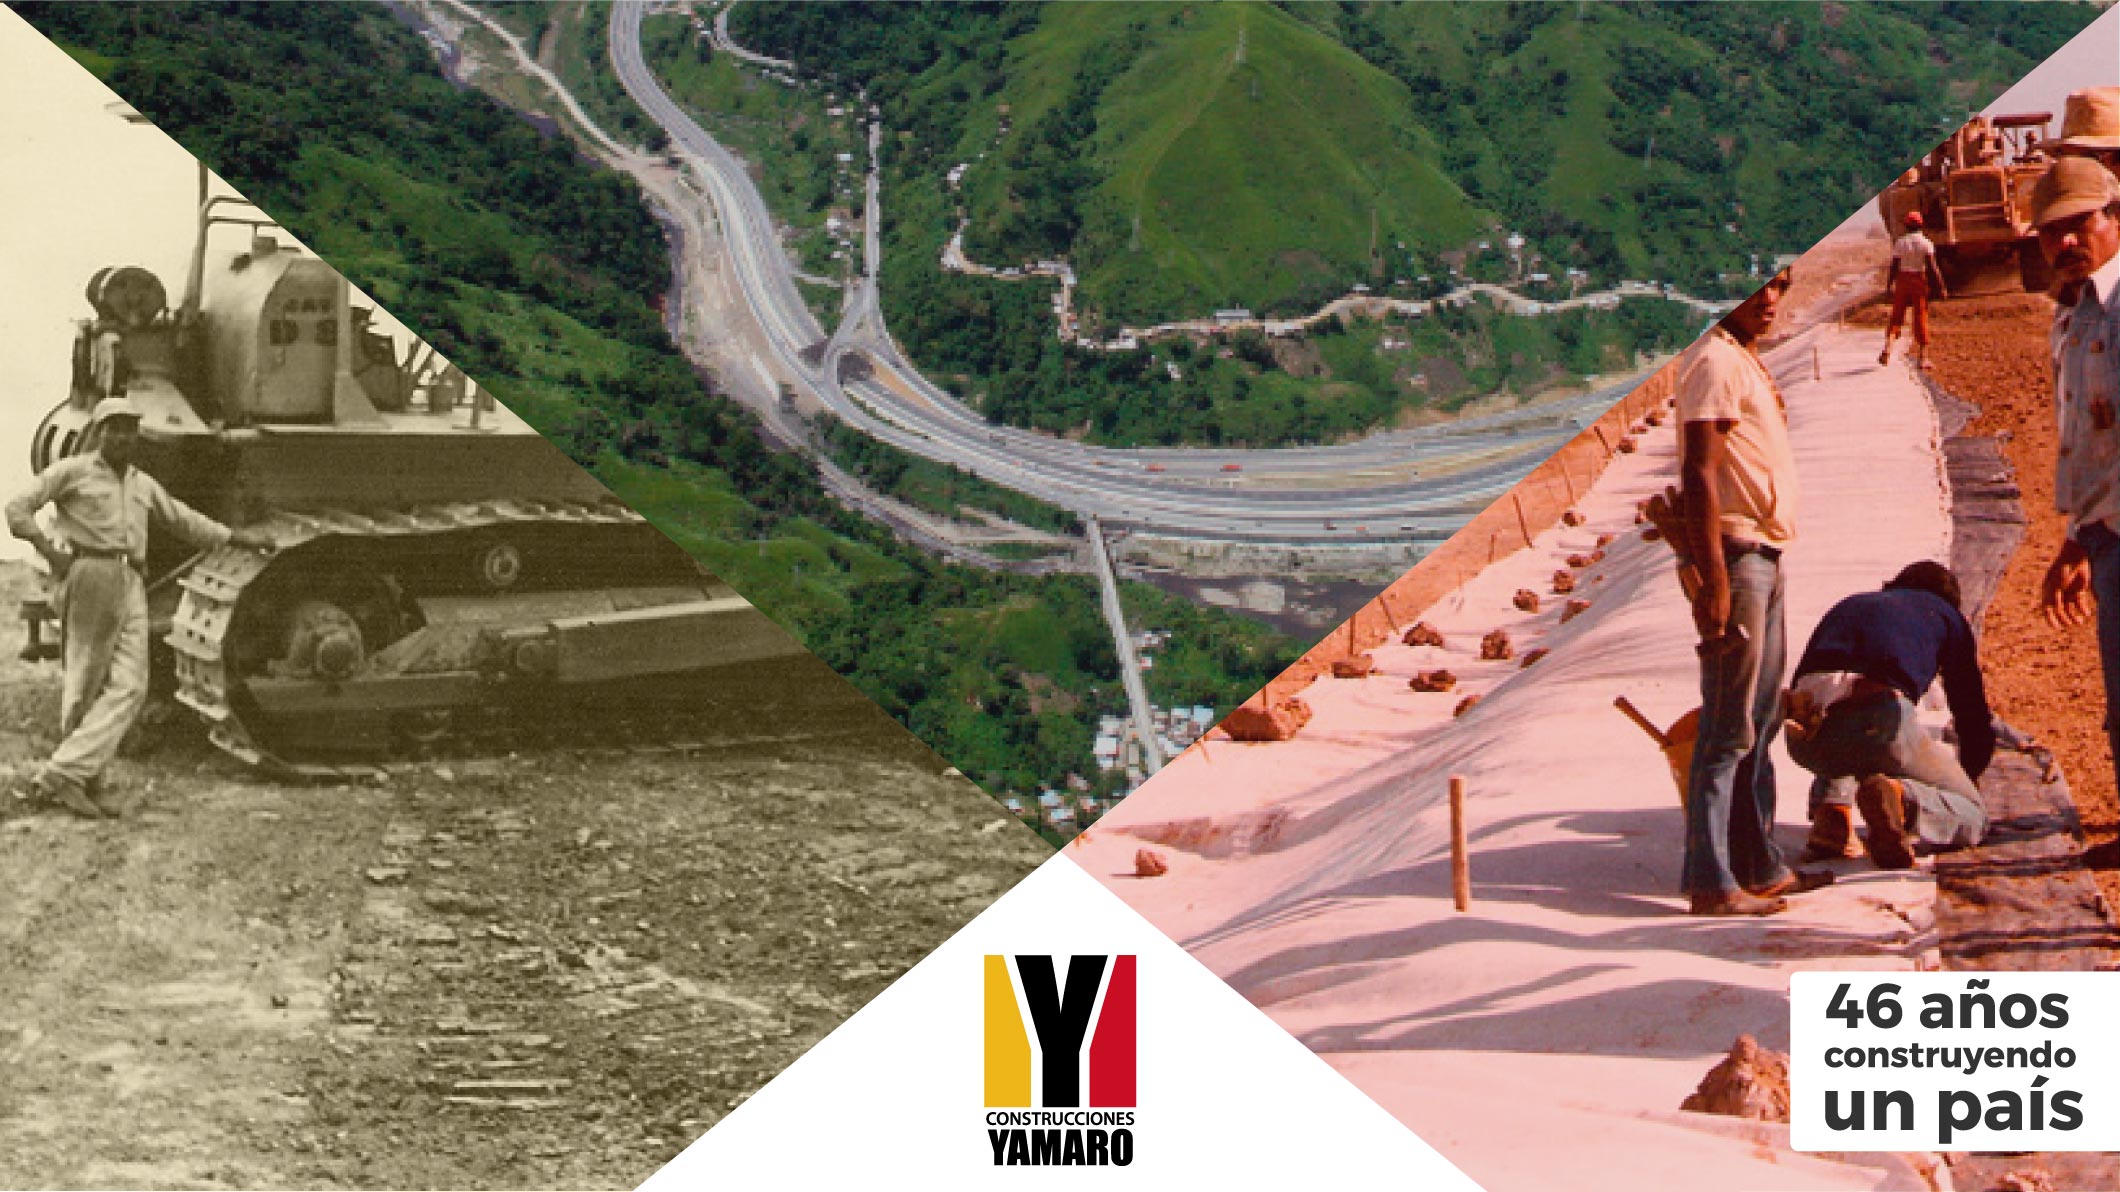 Construcciones Yamaro: Many good works made during more than 40 years